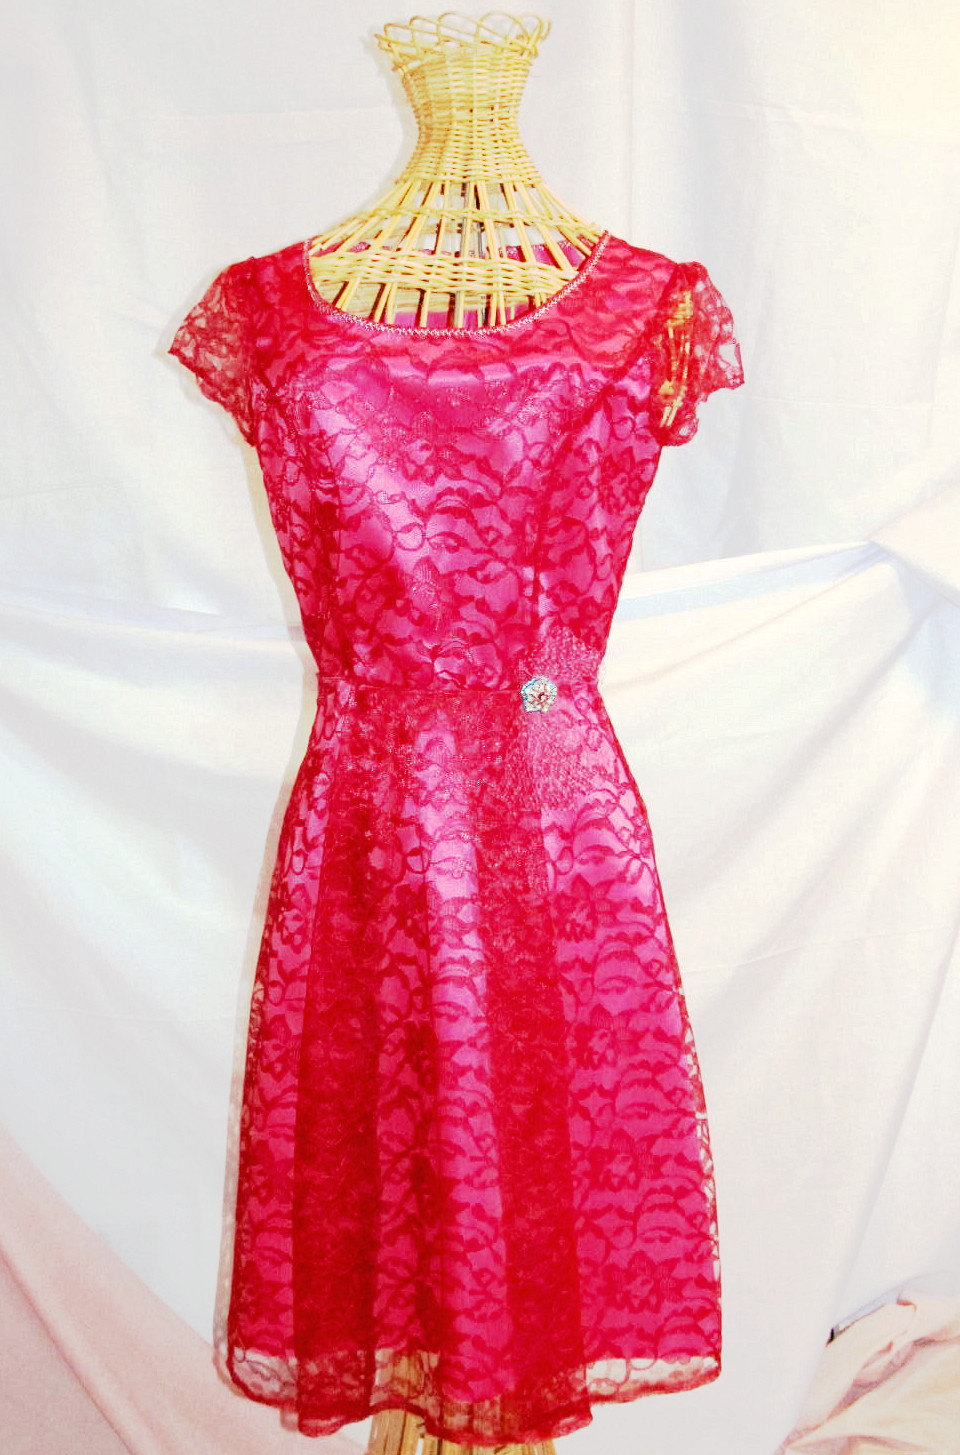 Vintage Style Womens Lace Cocktail Dress With Cap Sleeves, Bright Pink Satin Dress, Burgundy Lace, Retro Fashion Party Dress, Size 5 Or 6